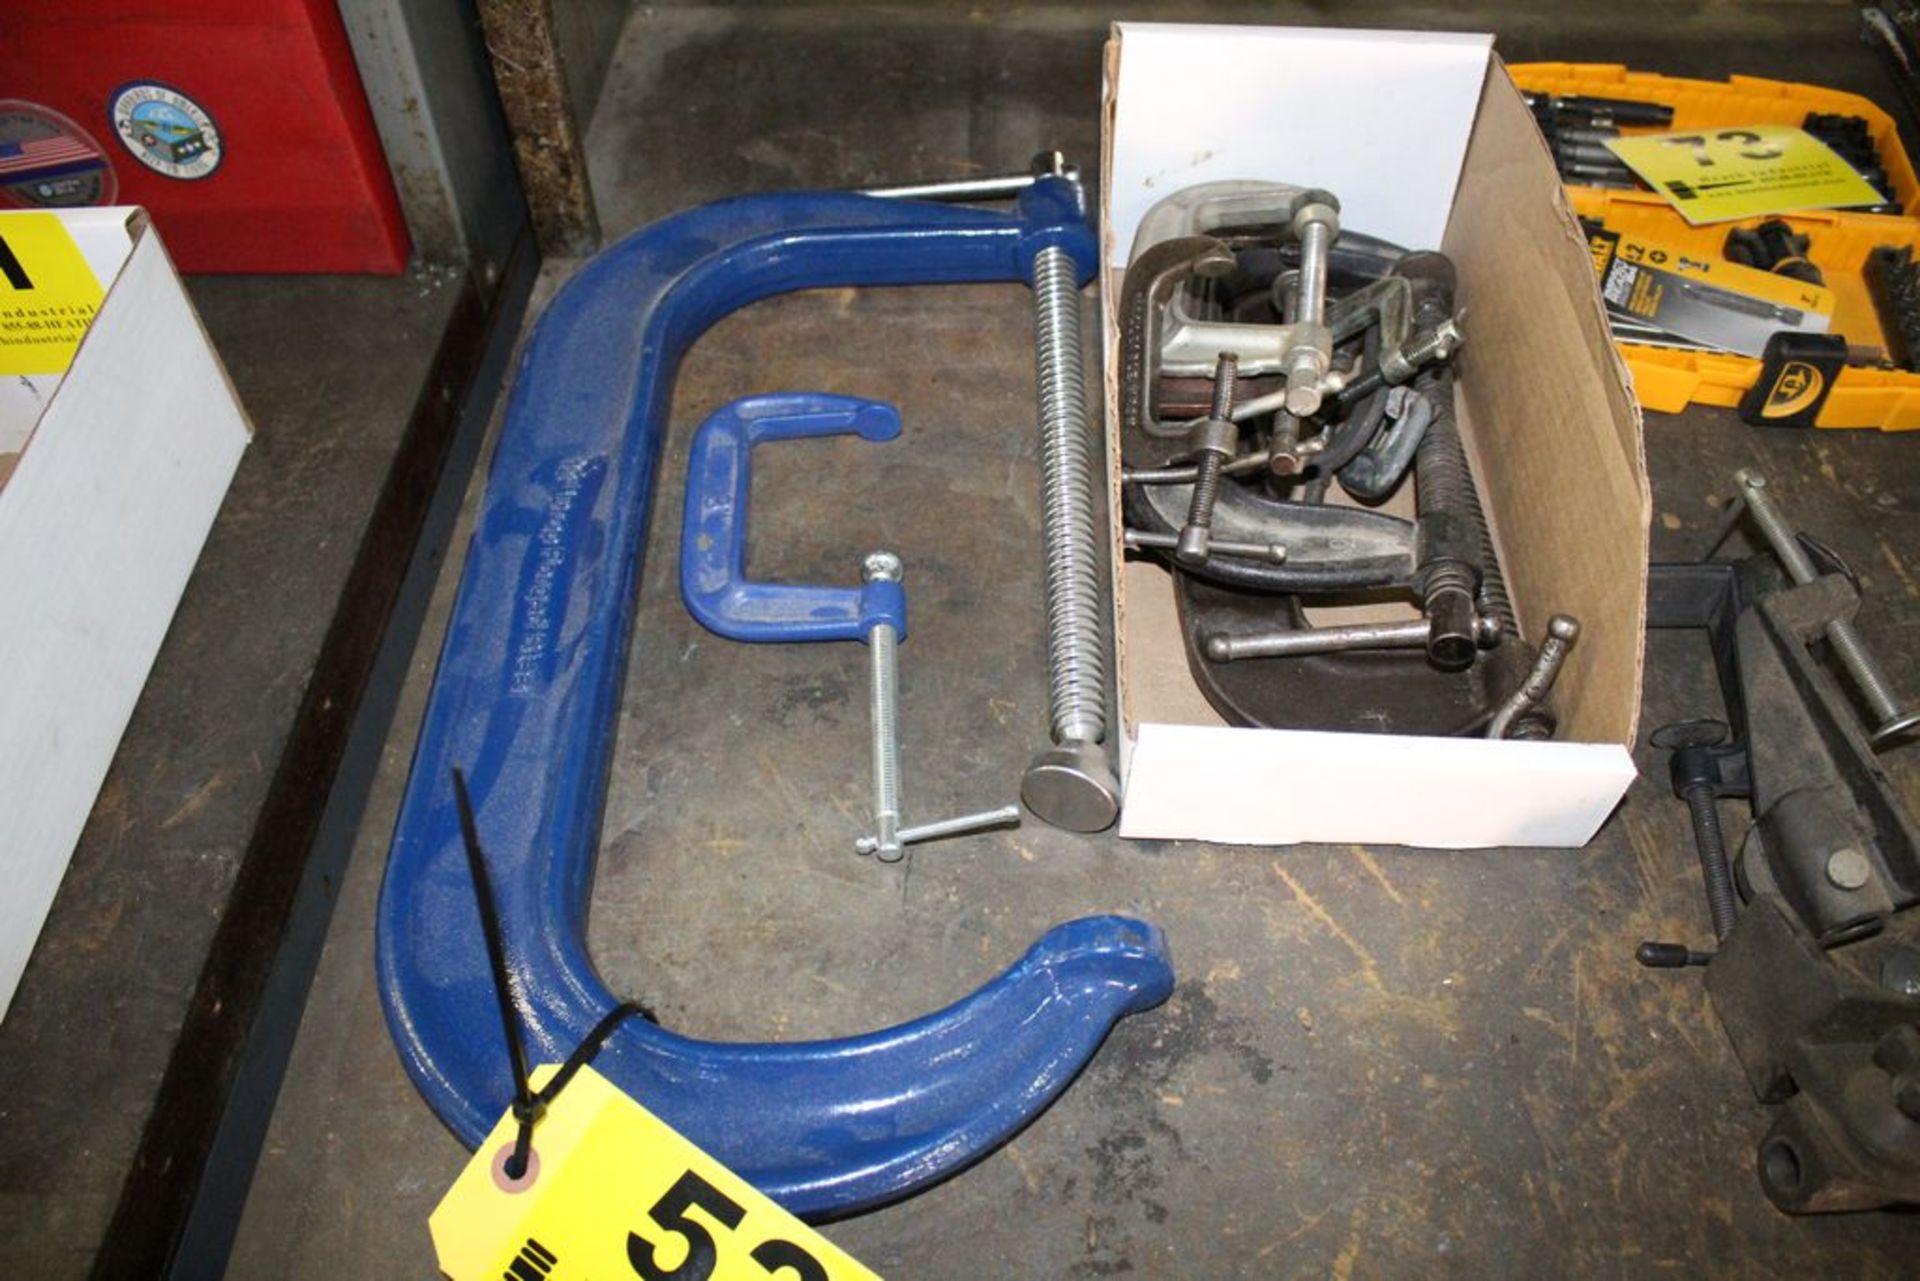 (2) C-CLAMPS - 12" & 2"